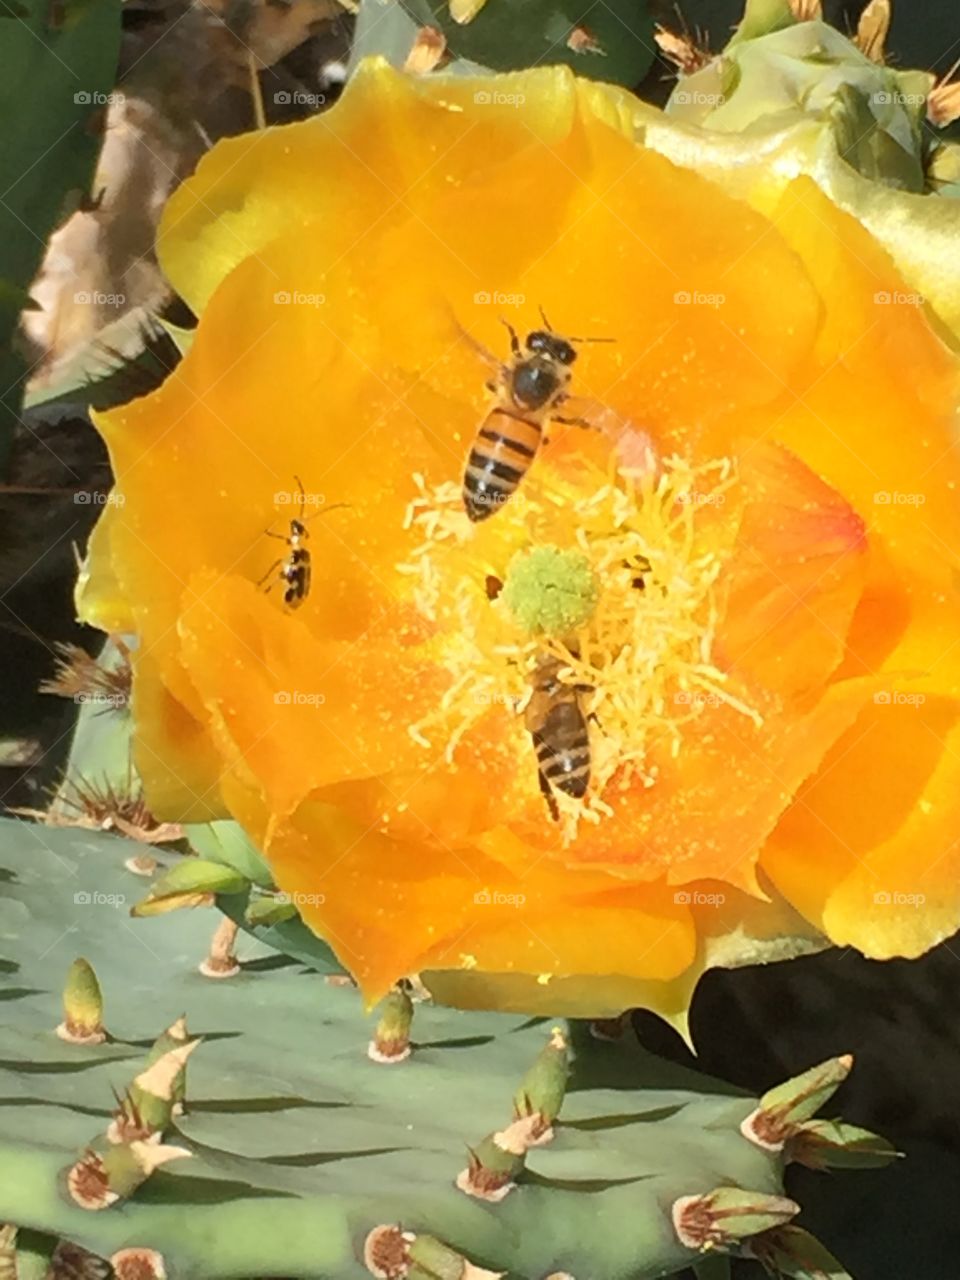 Bees buzz around a bright yellow prickly pear cactus flower. 